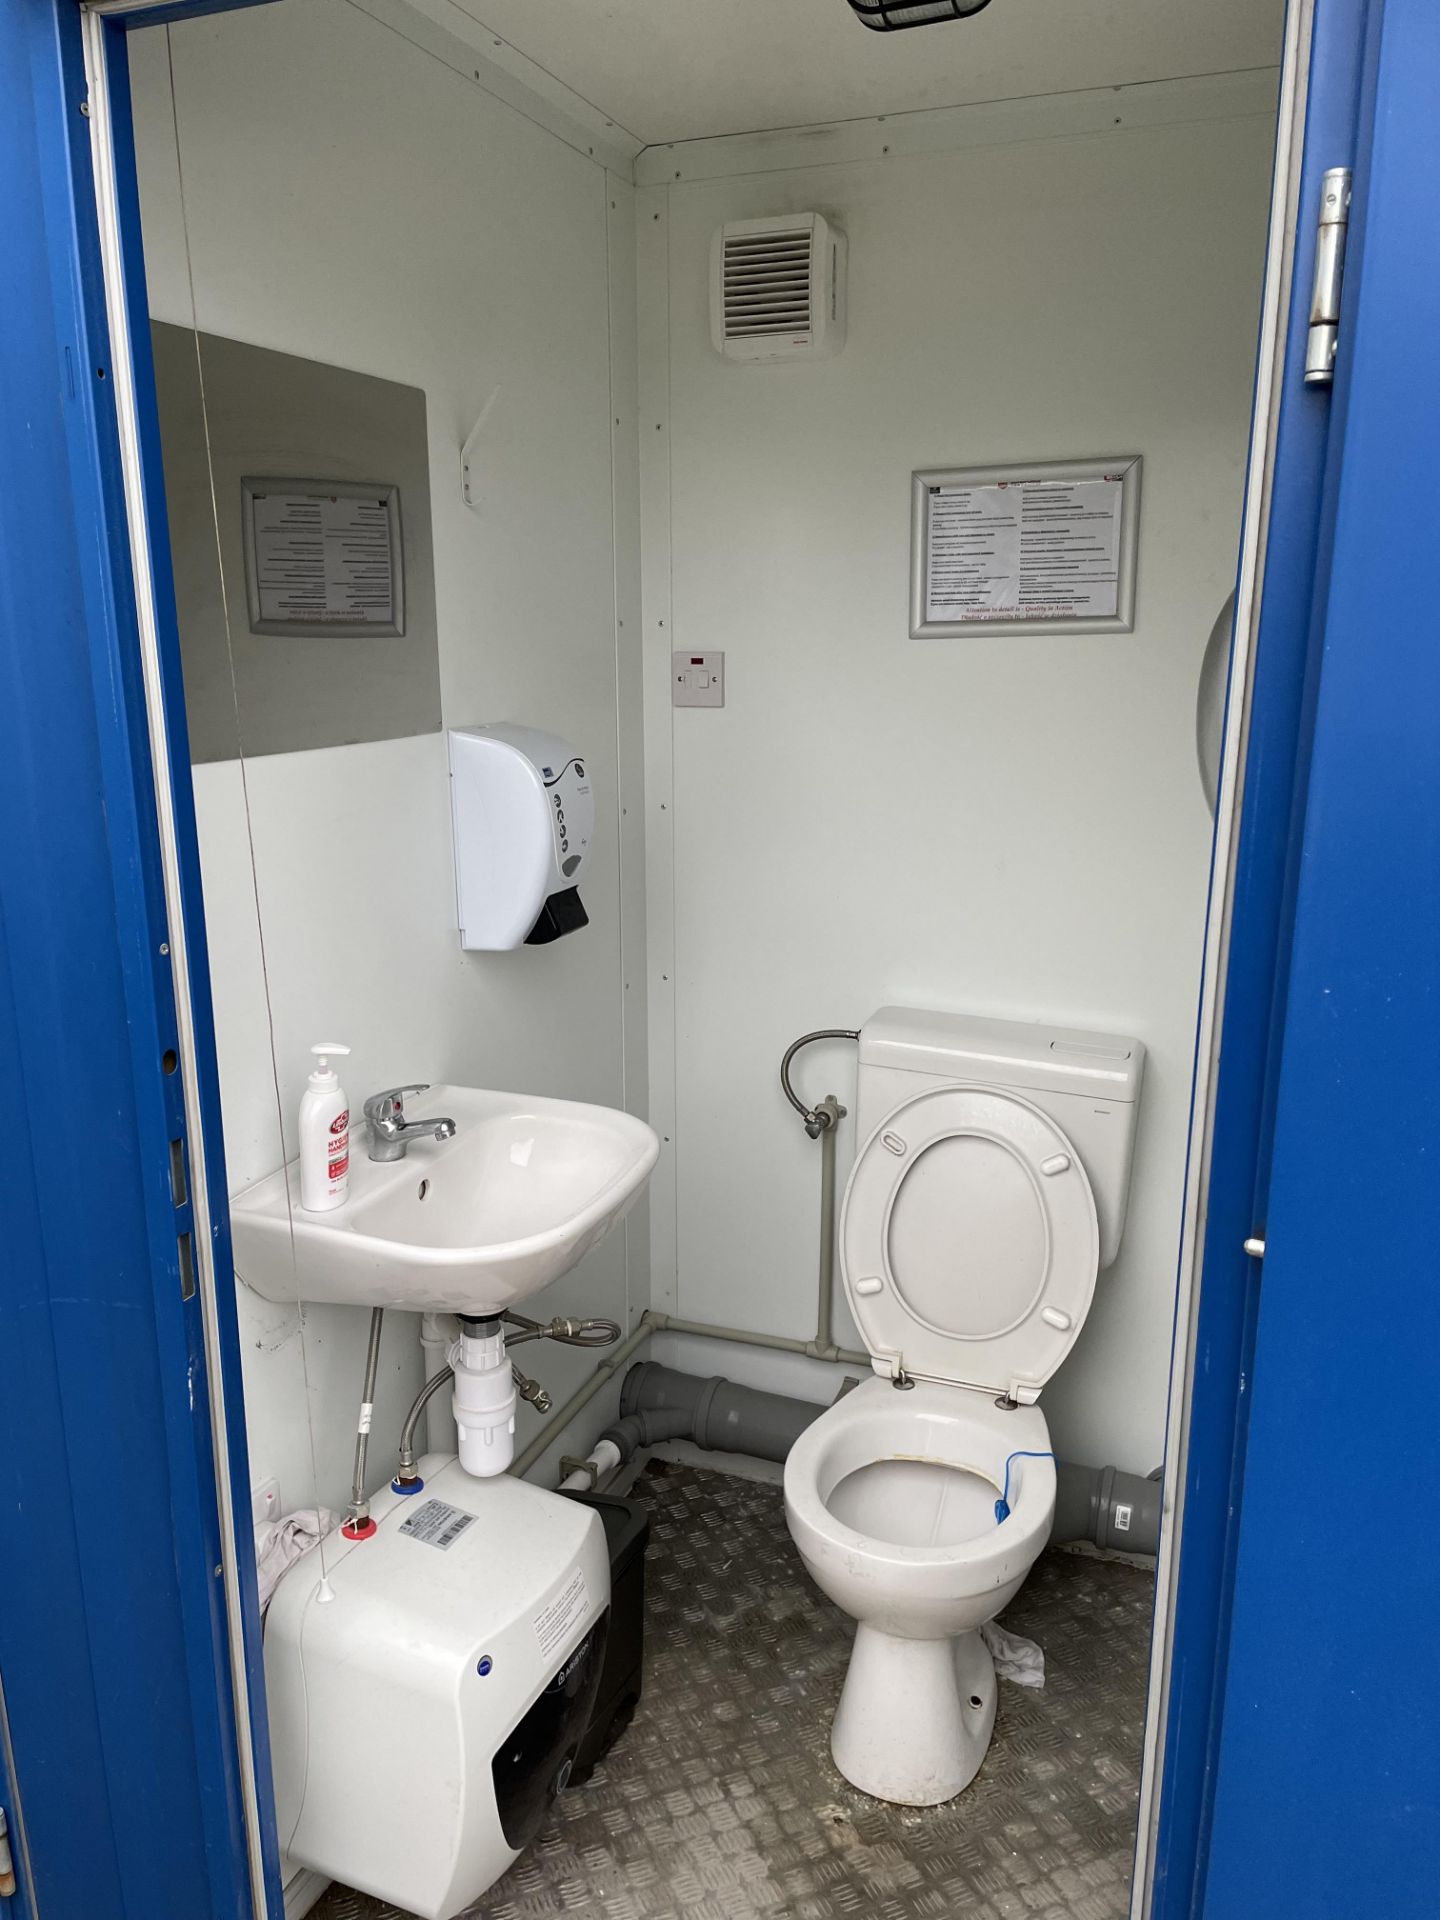 CTX Containex Type 8-WC Double Toilet Block S/No. 091430698 - Image 4 of 5